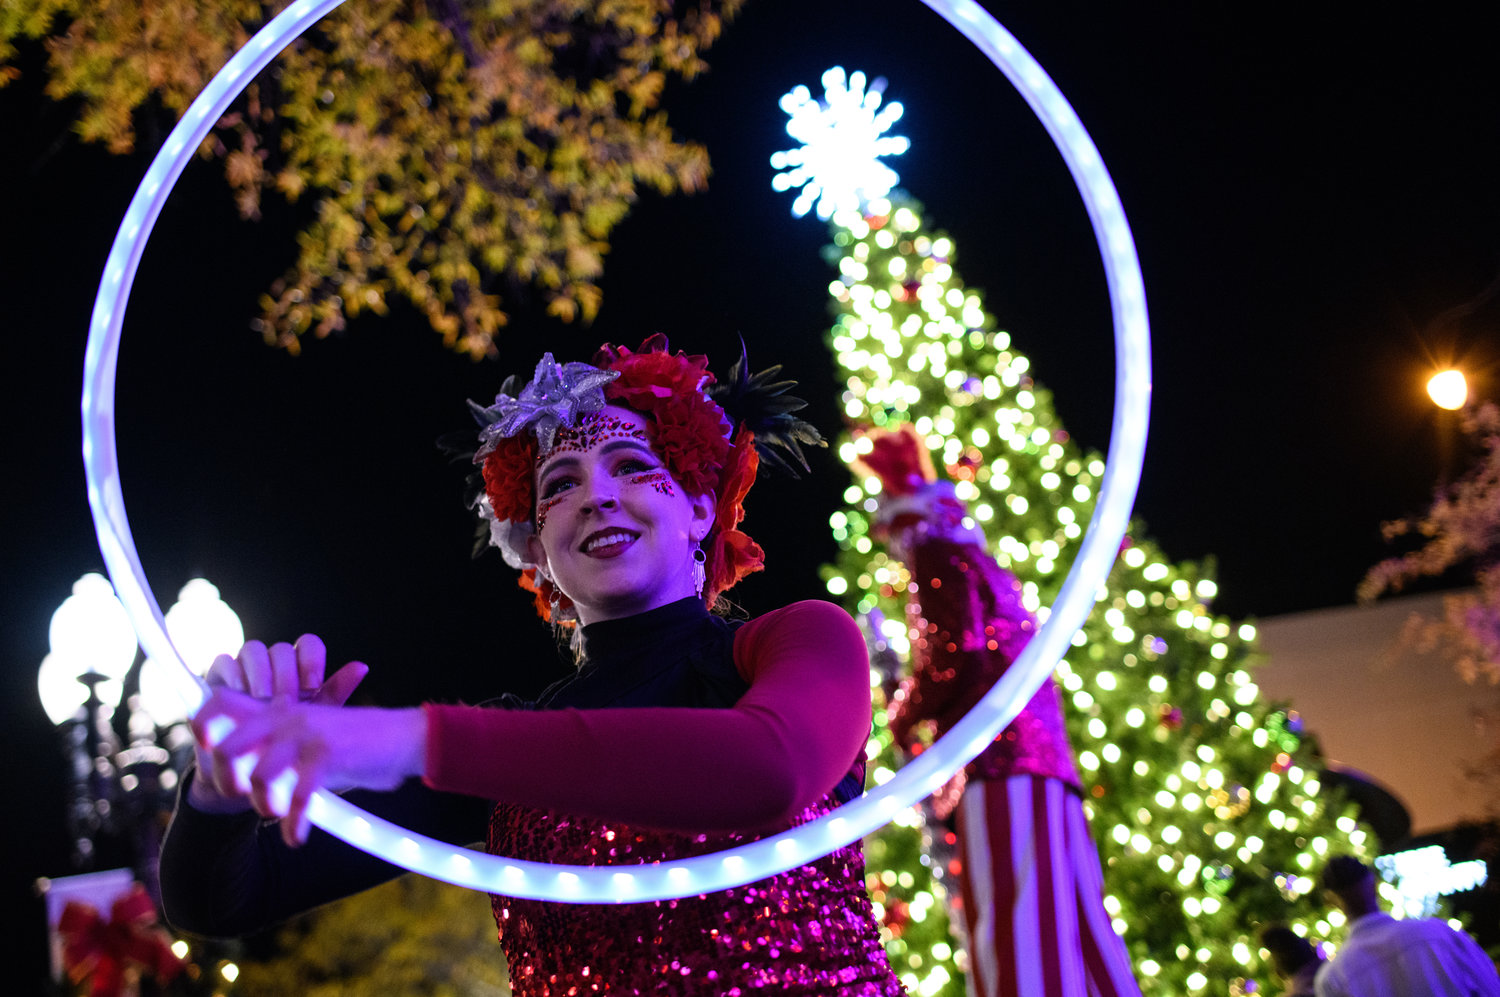 A performer for Imagine Circus performs with a hula hoop during Holidays on Hay on Friday in downtown Fayetteville.